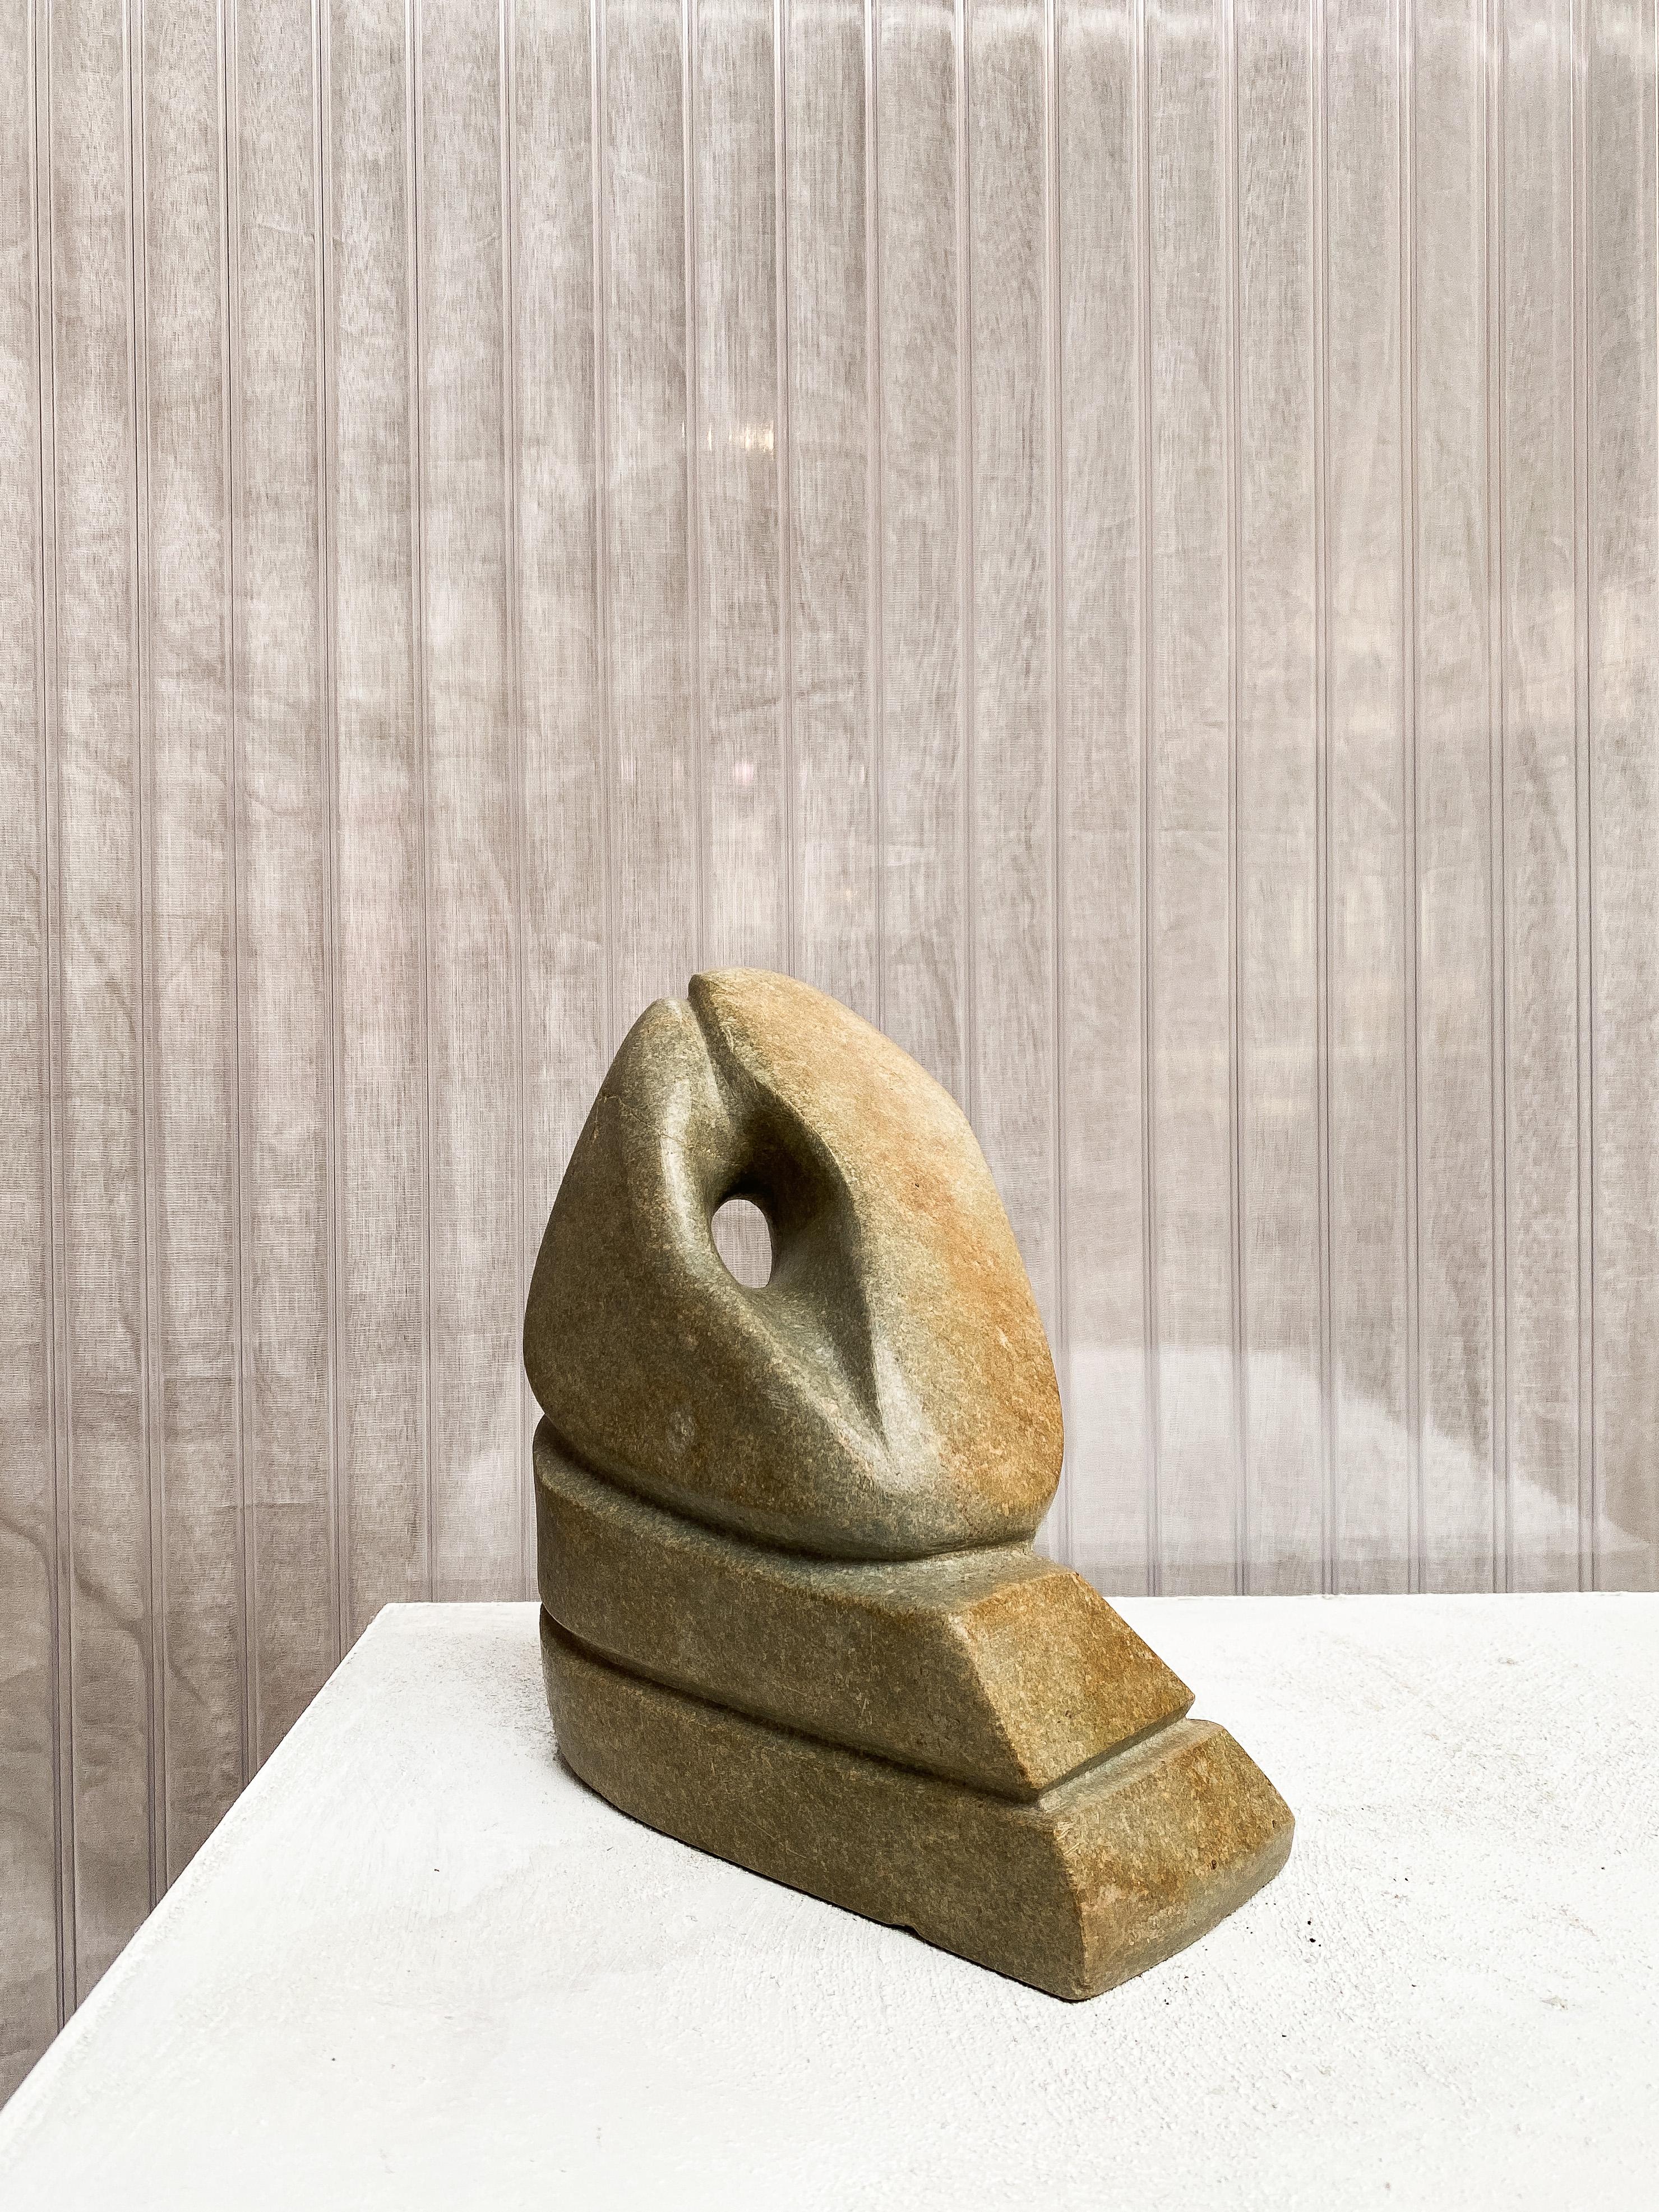 Organic shaped Abstract Mid-Century Sculpture in Greenish Stone, Hand Carved For Sale 2